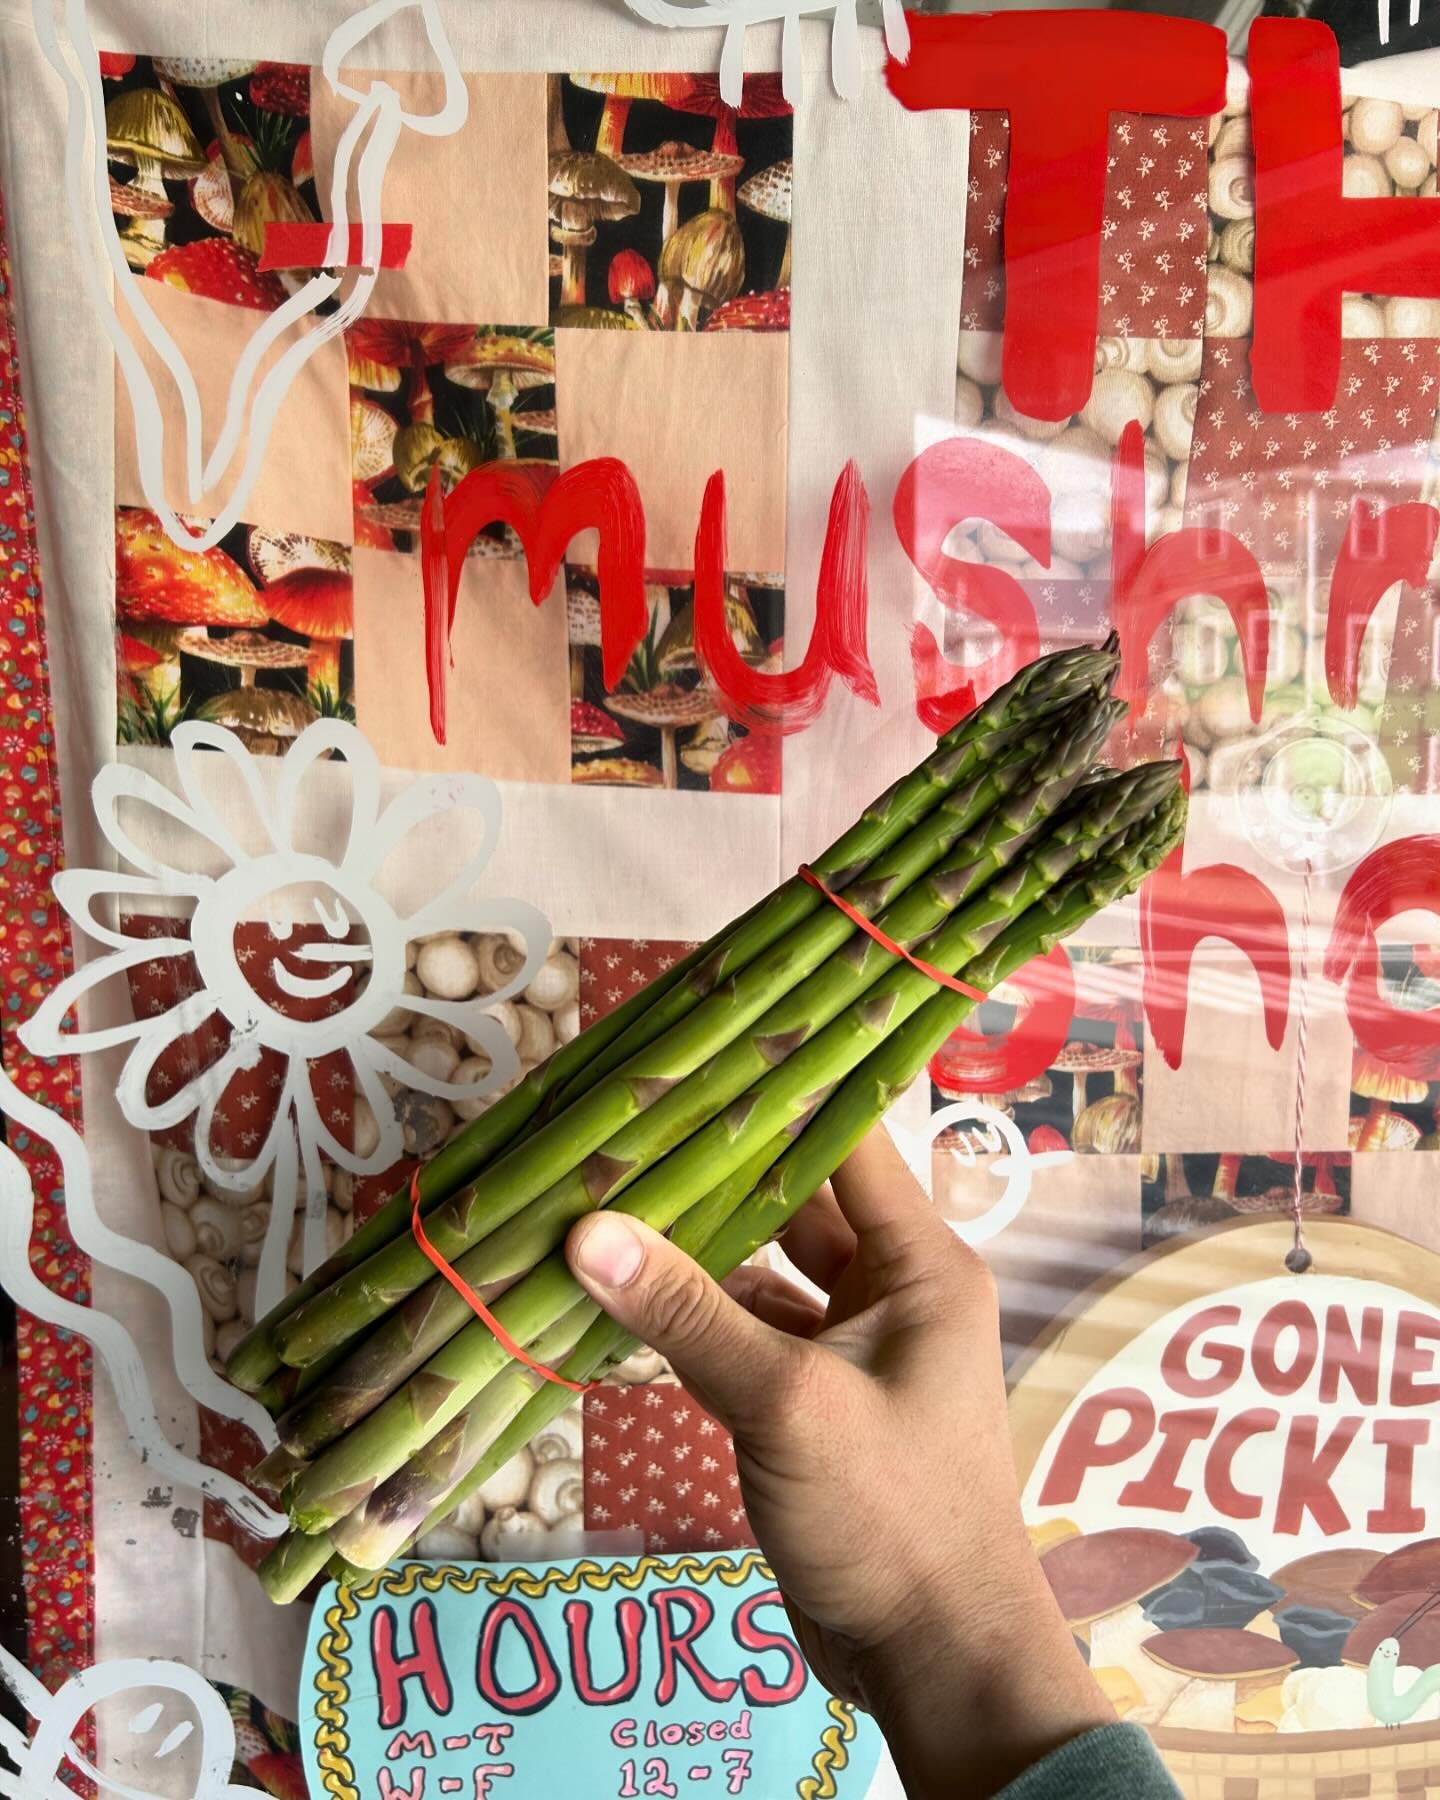 It&rsquo;s the BEST
.
UHG asparagus makes me so happy- and it&rsquo;s here- local hadly grass:)
.
Aside from that we&rsquo;ll have snacks and drinks for your porchfest weekend 
.
Plus performance by @kova.tova at 2 on Saturday
.
Chaga maple syrup fro